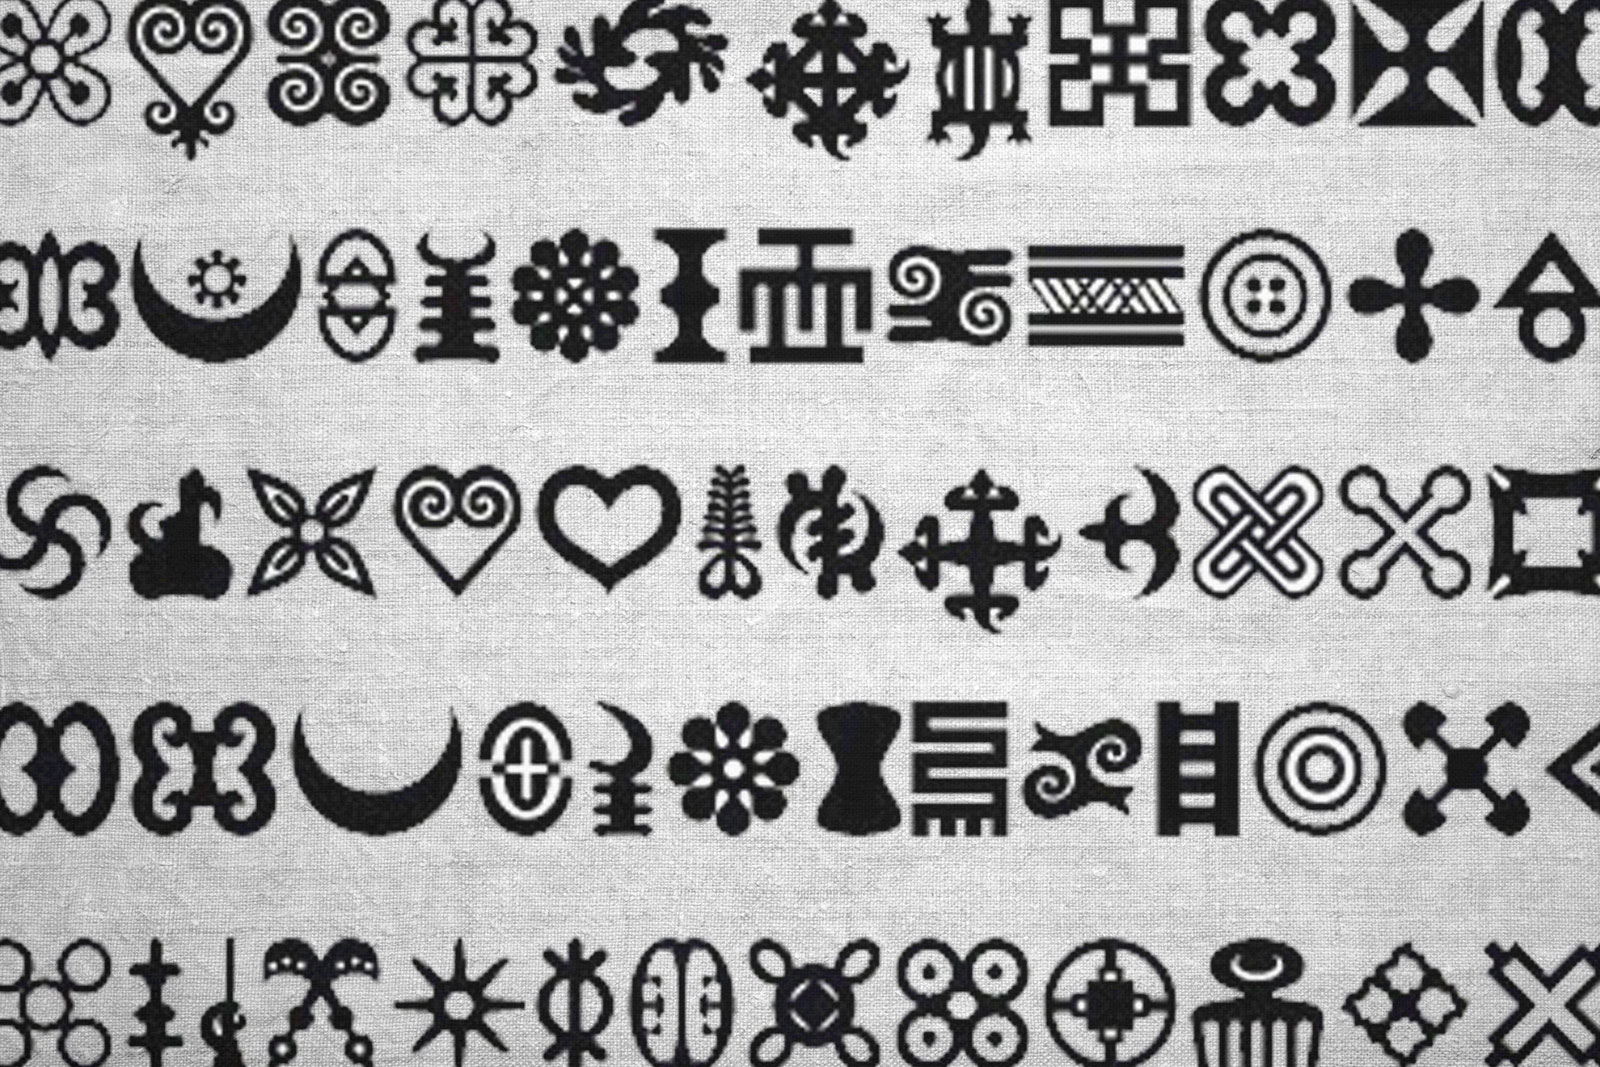 African symbols and their usefulness in social work and development